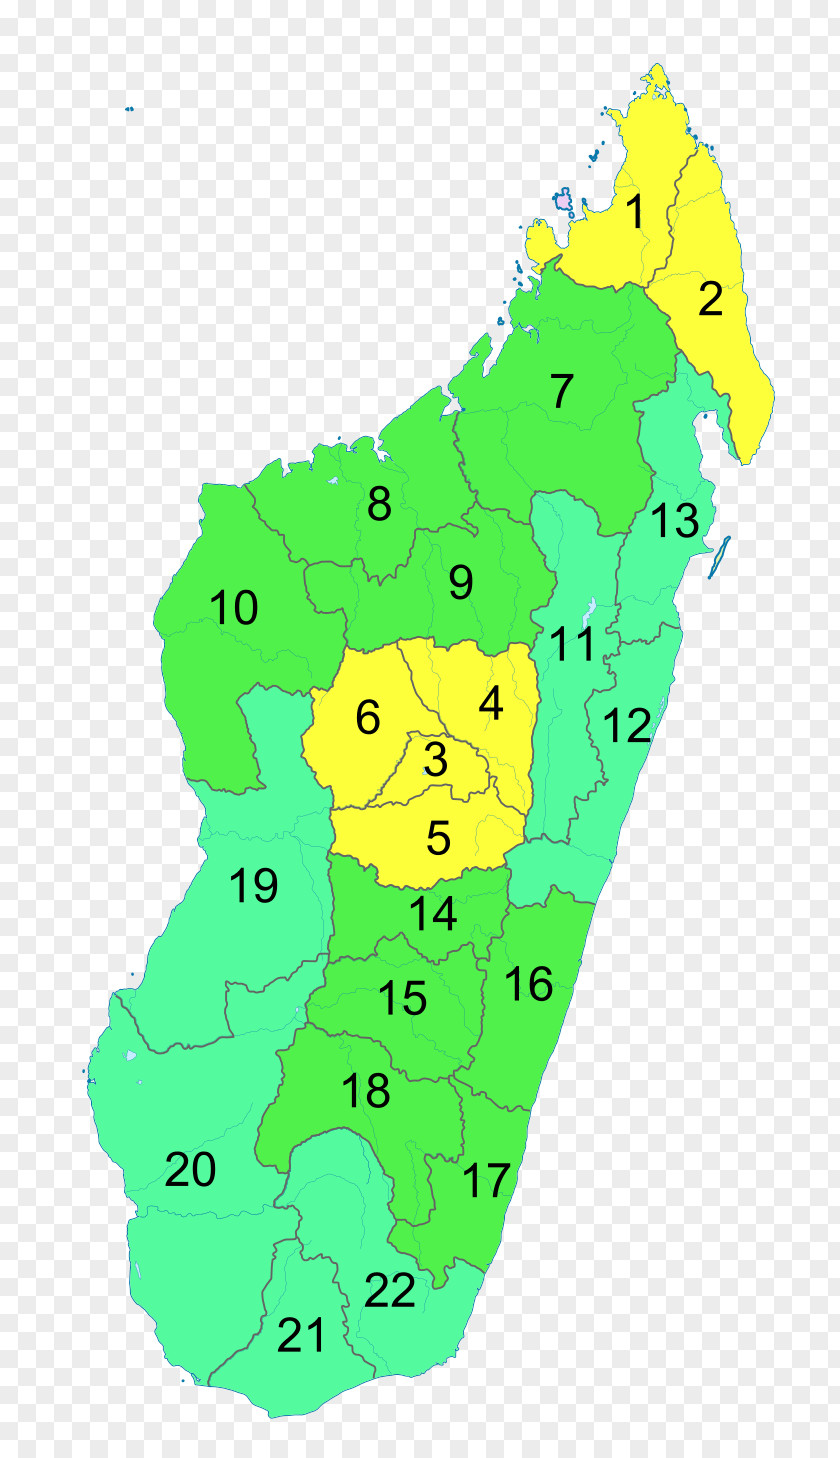 Madagascar Provinces Of Melaky Wikipedia Malagasy Subdivisions PNG